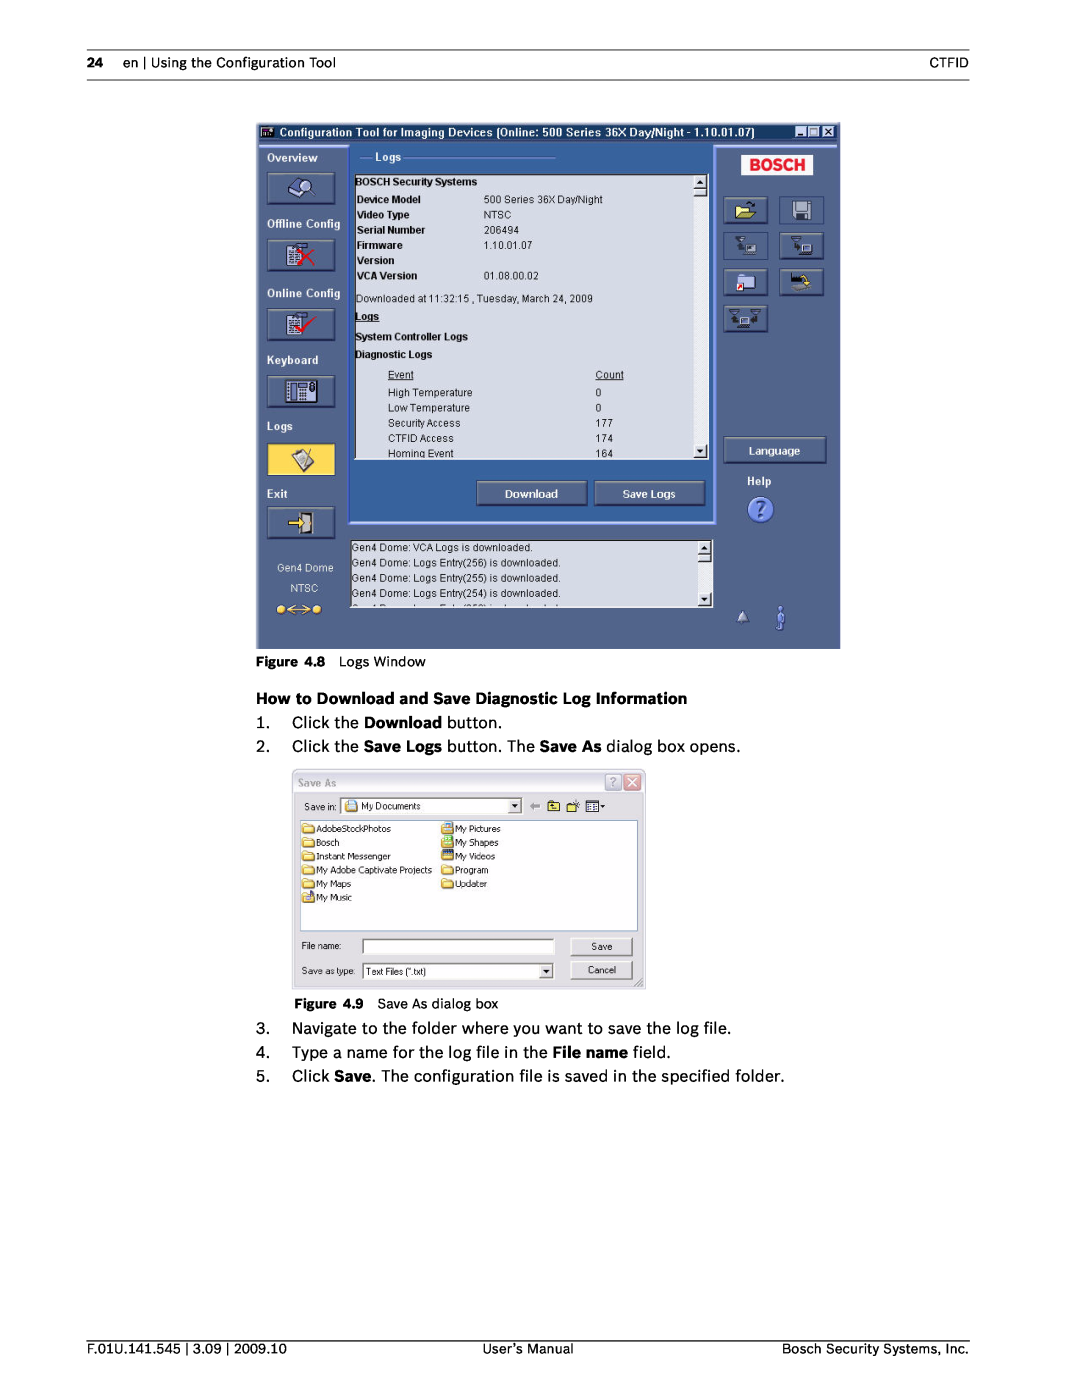 Bosch Appliances VP-CFGSFT user manual Click the Download button 